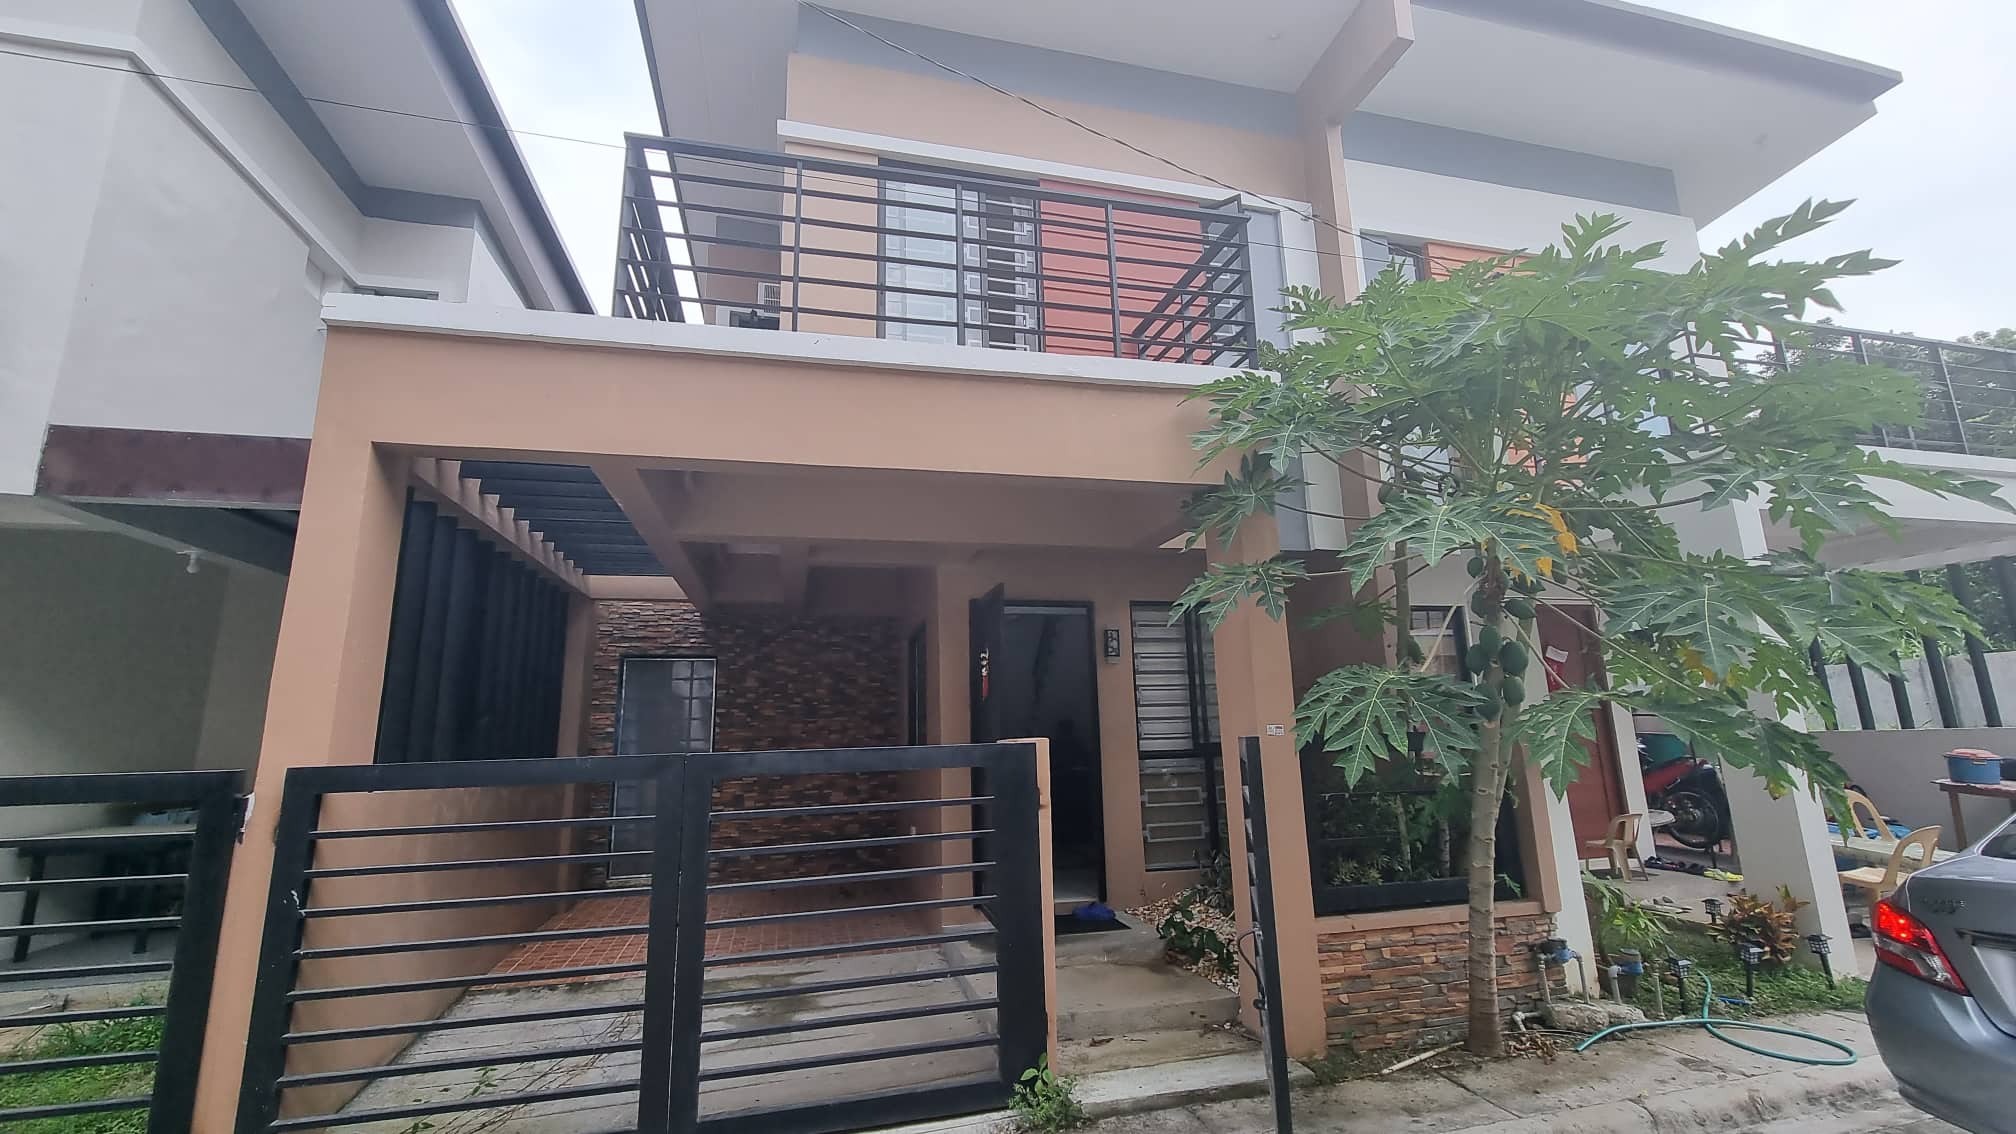 FOR SALE: 2 Storey House and Lot in Amiya Rosa Batangas